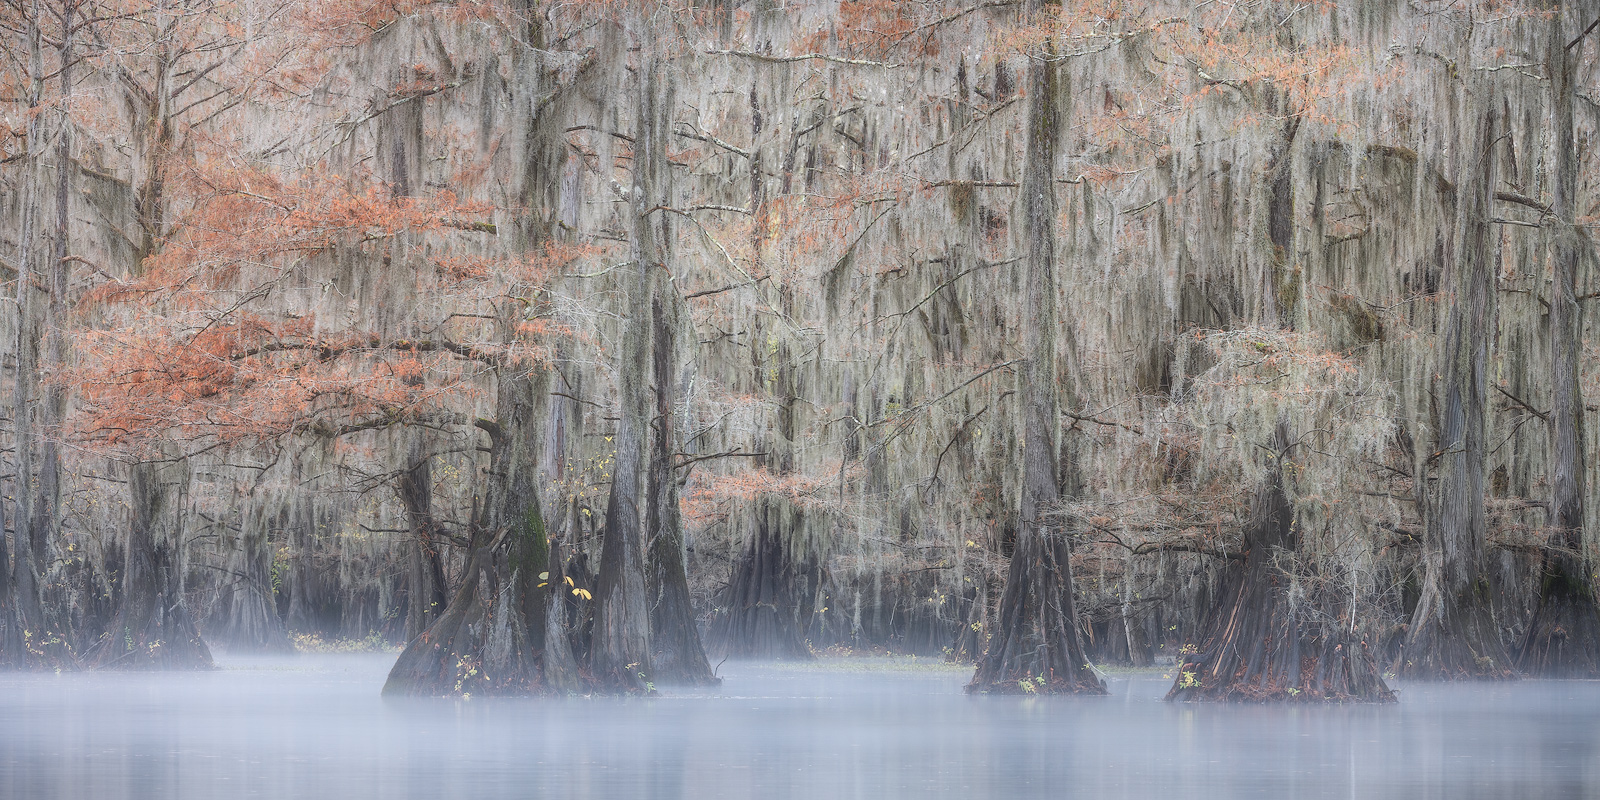 A cool misty morning deep within the bayou.